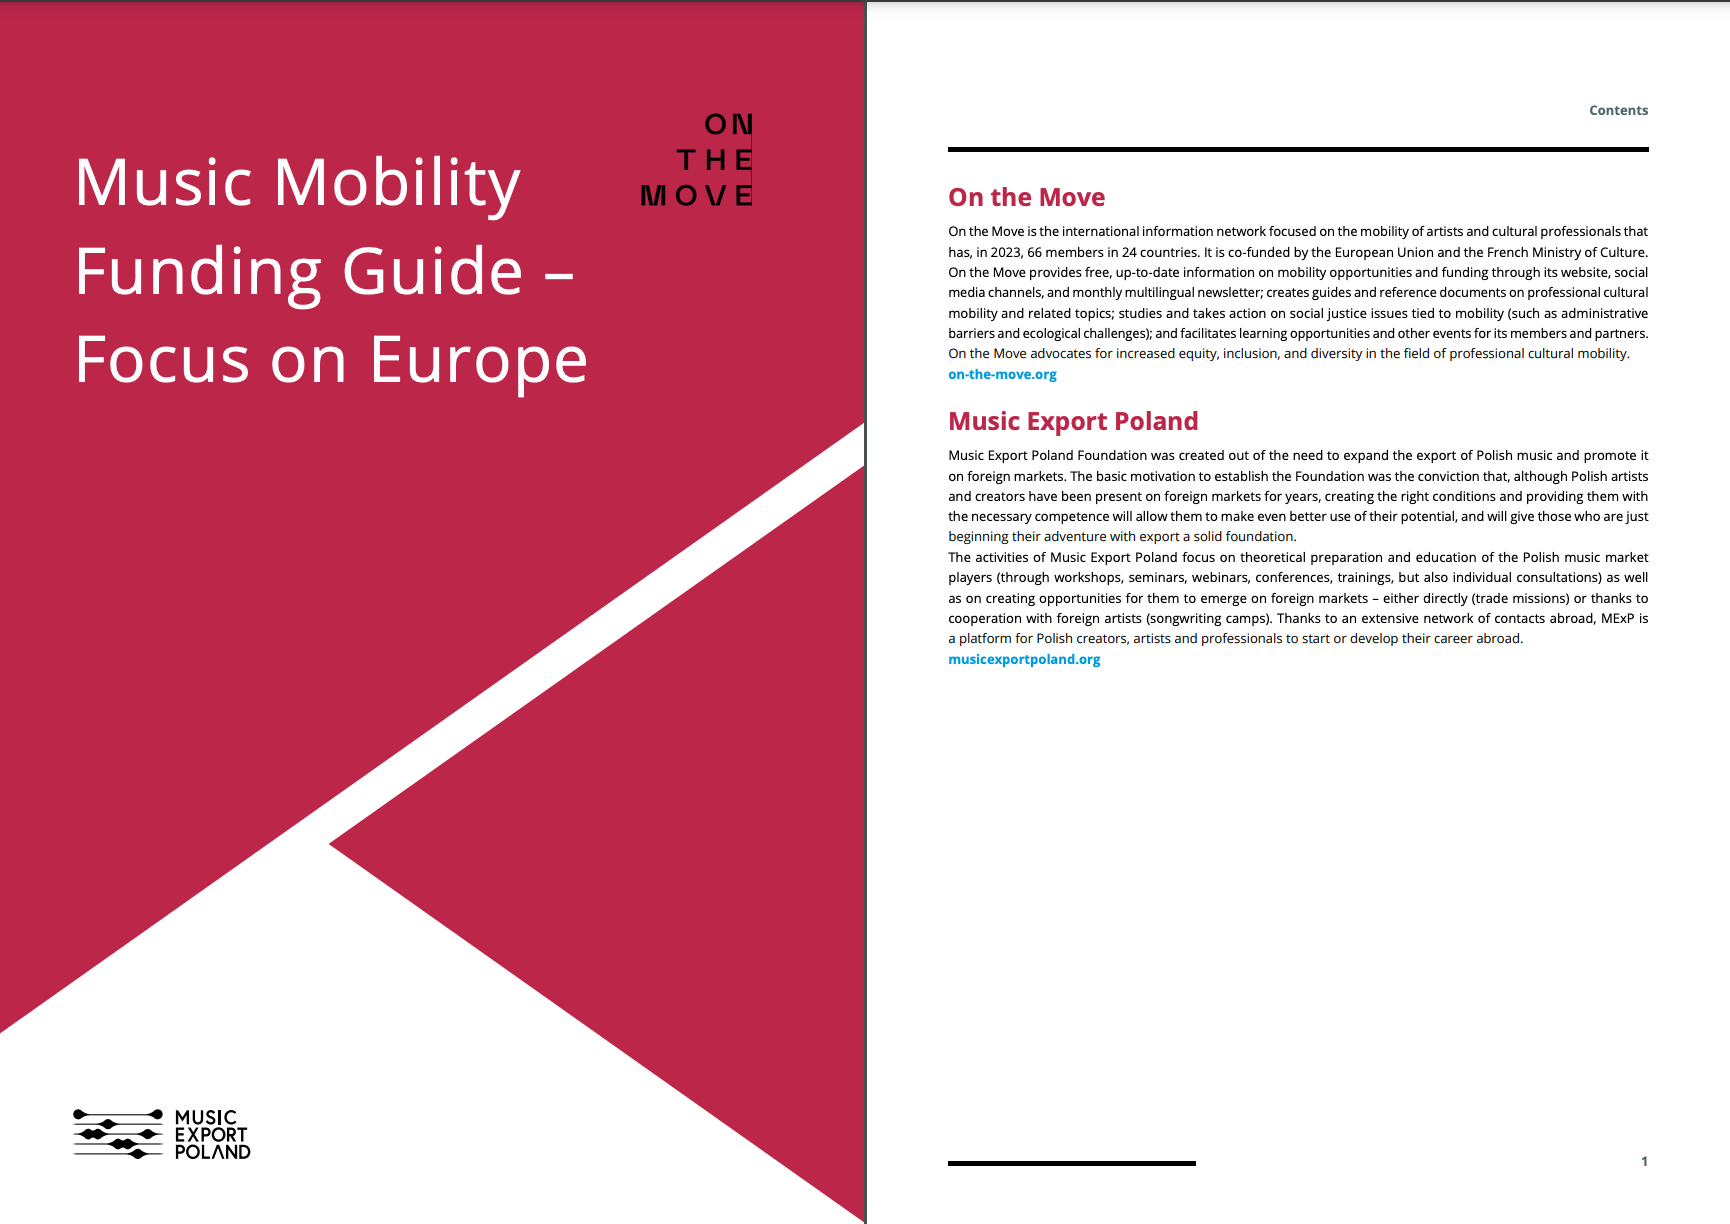 MUSIC MOBILITY FUNDING GUIDE